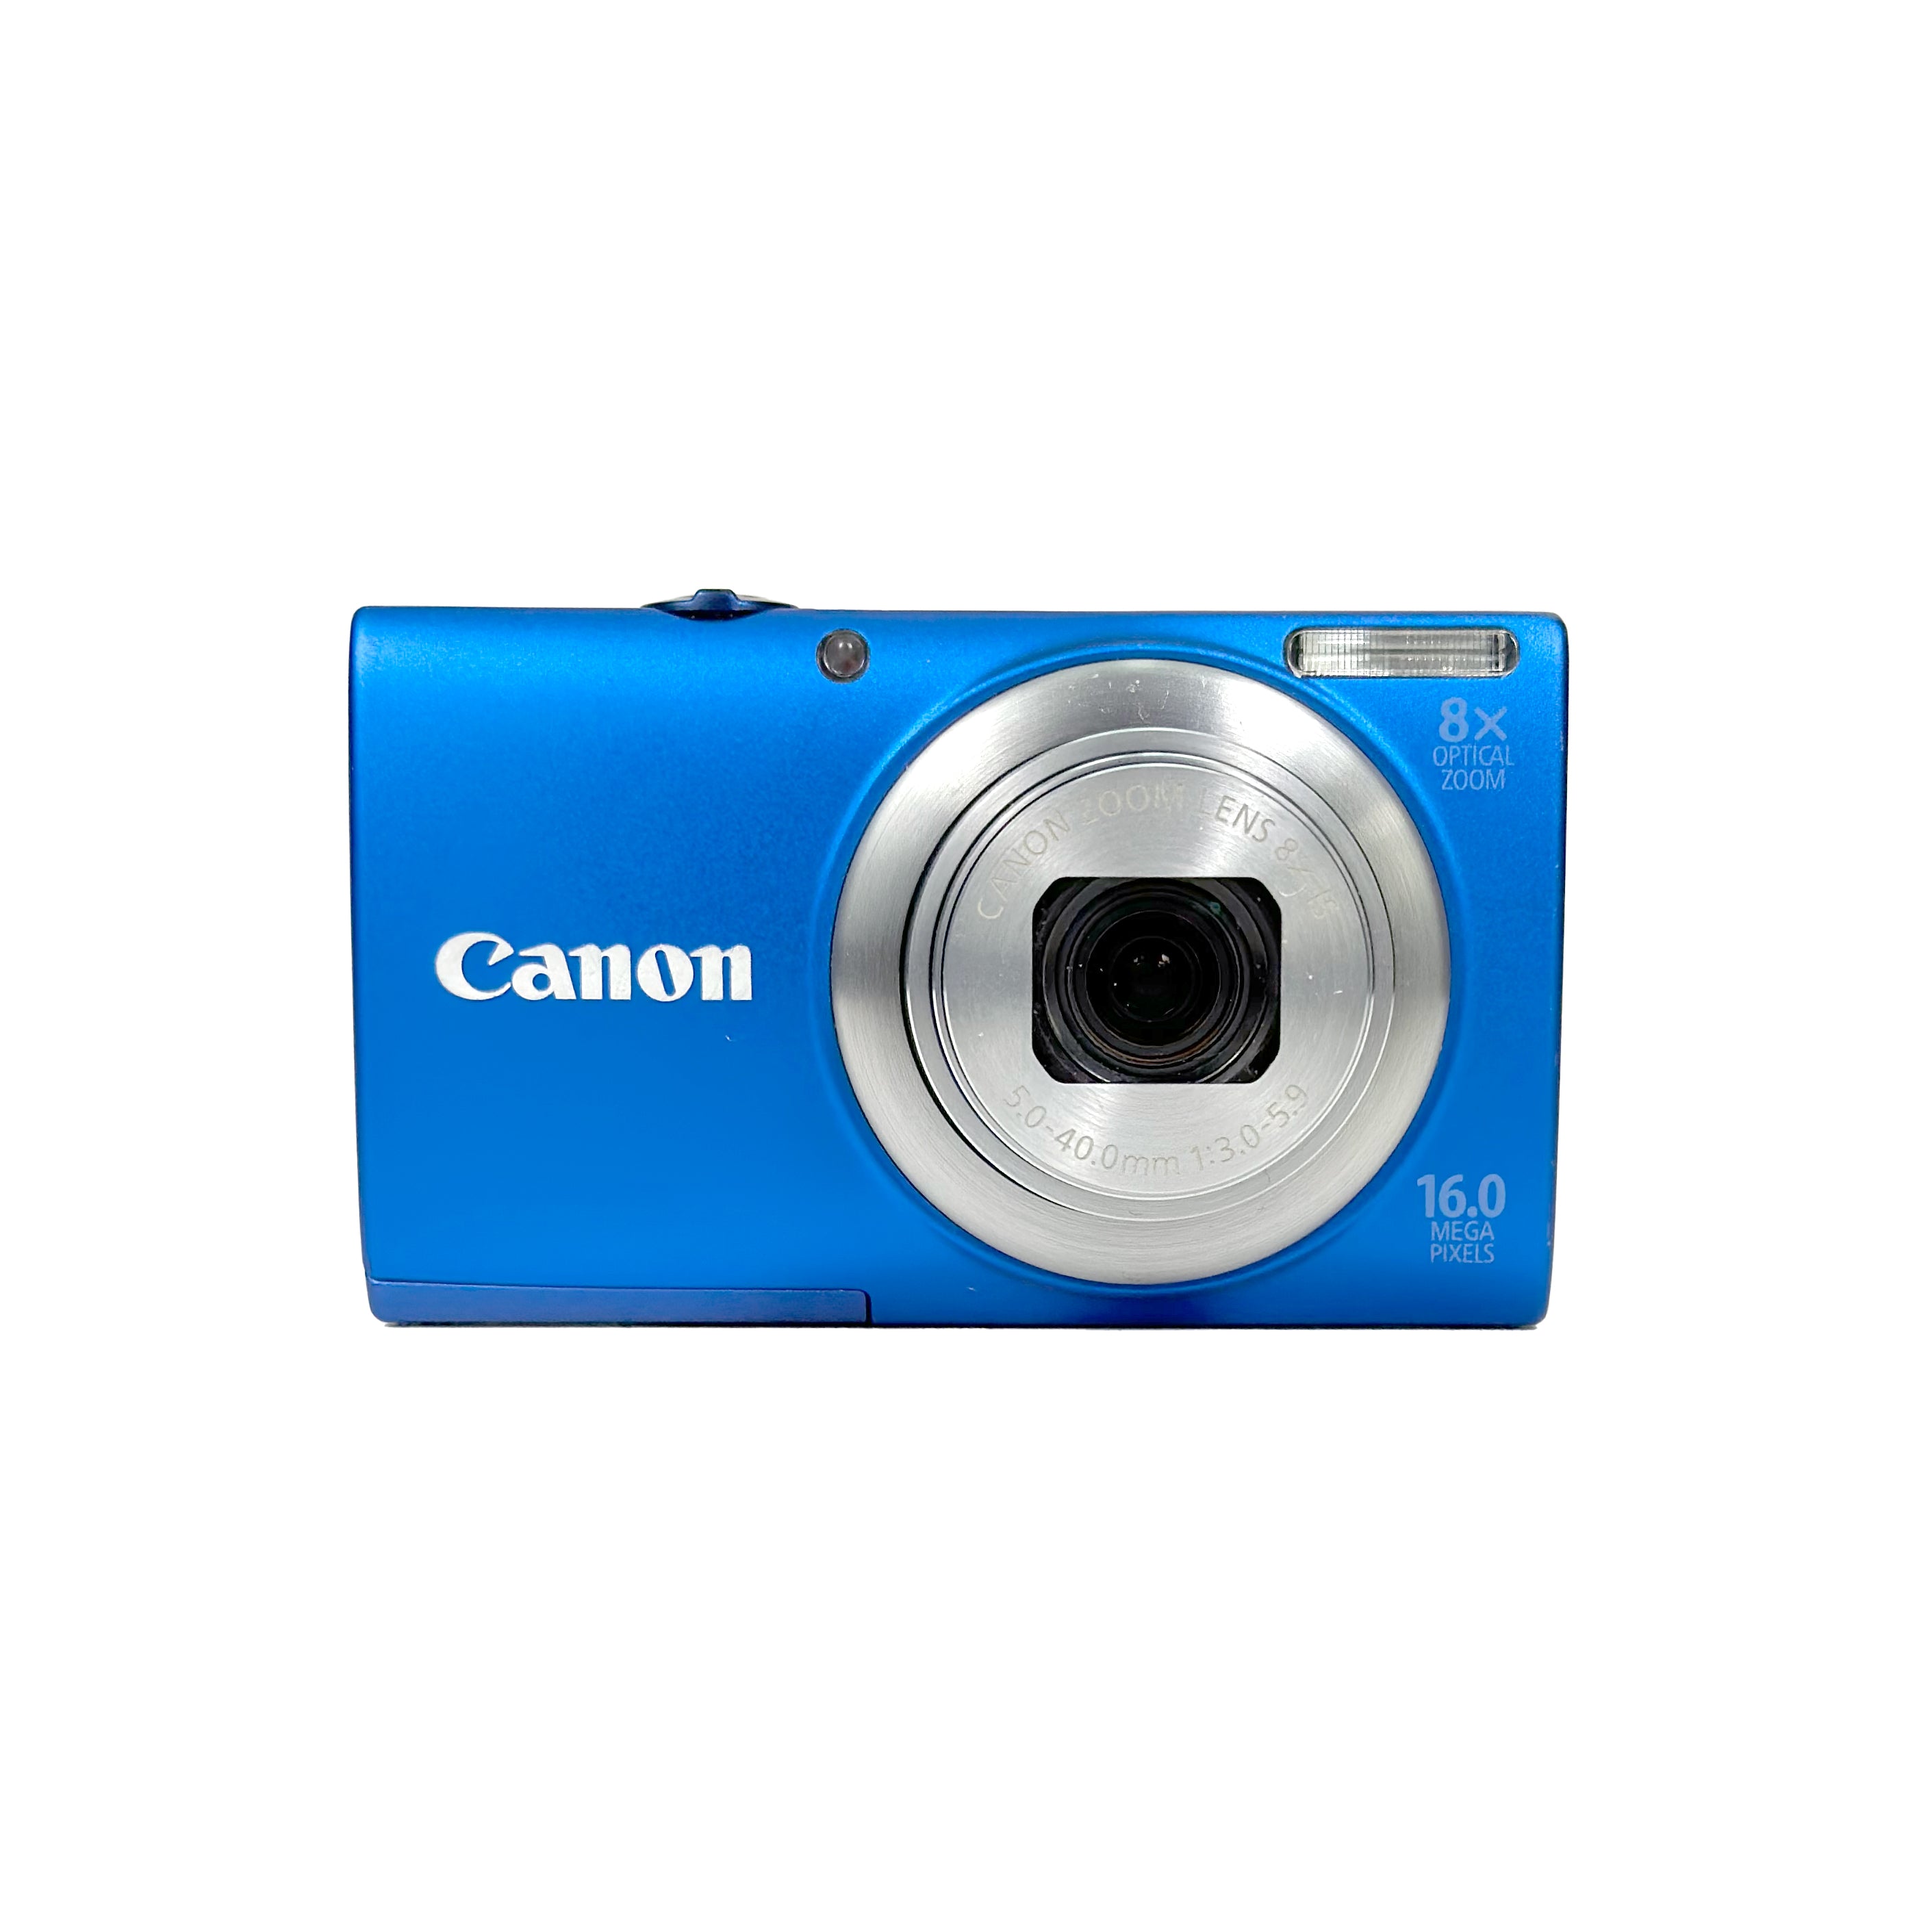 Canon PowerShot A4000 IS Digital Compact